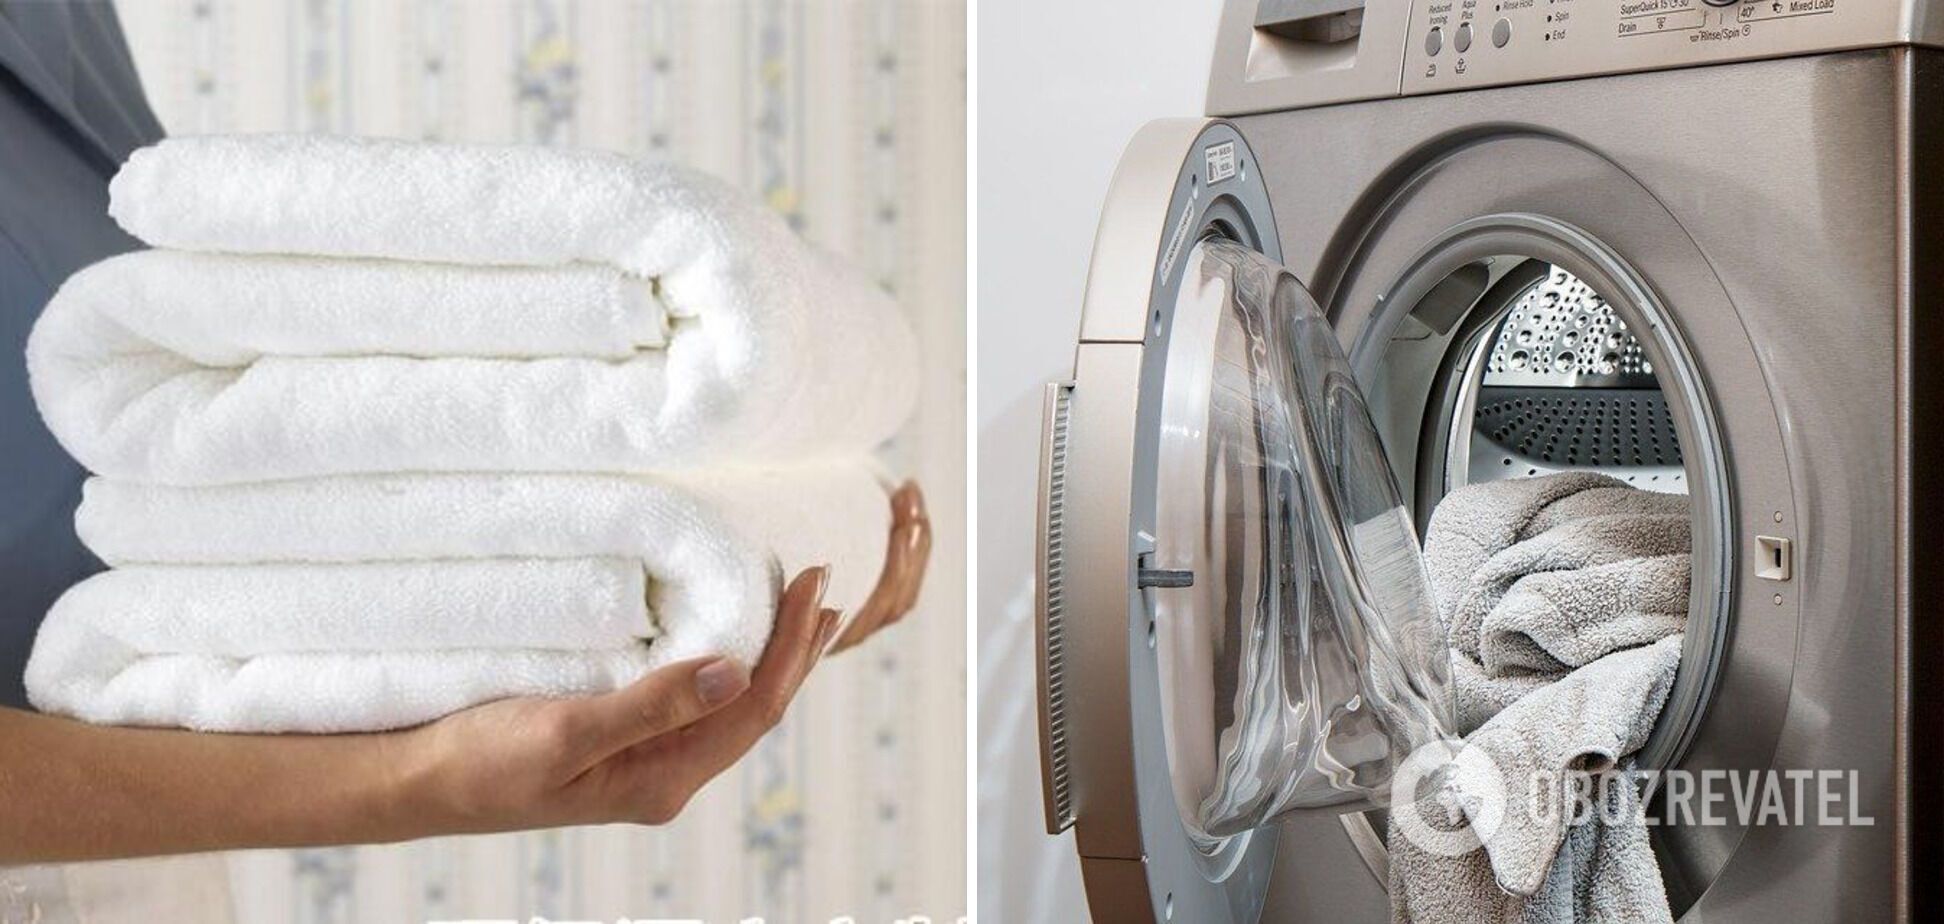 How to clean towels without a washing machine